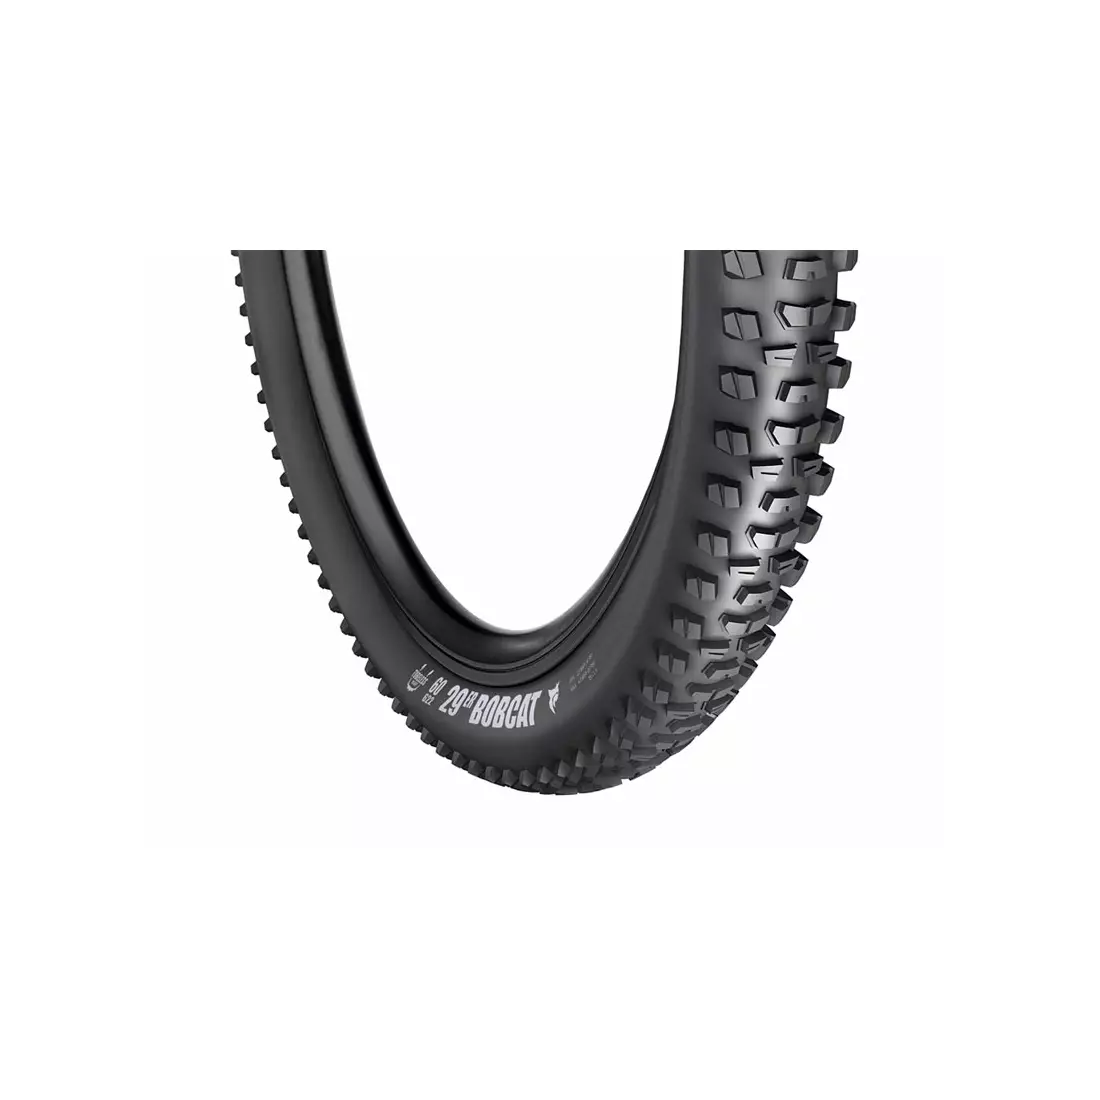 VREDESTEIN BOBCAT mtb bicycle tyre 27,5x2.35 (60-584) TPI120 915g black coiled VRD-27251